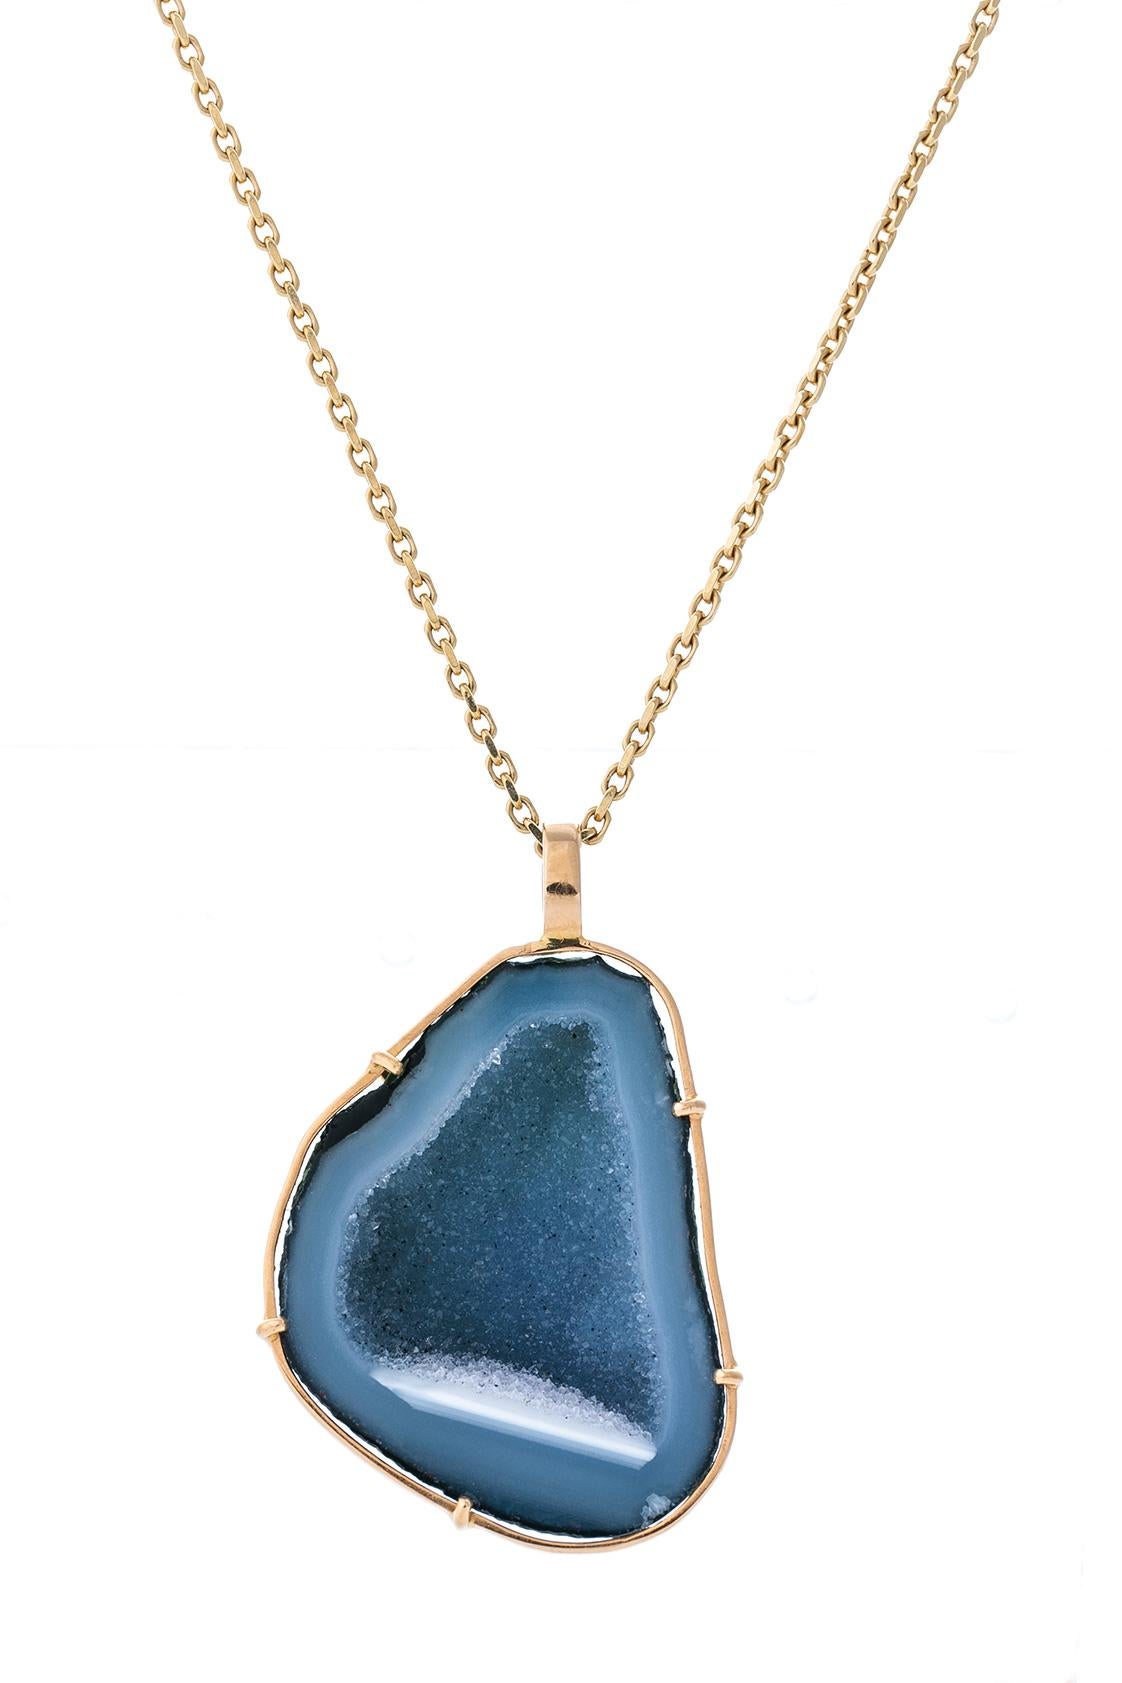 This 18 k rose gold light Blua agate geode pendant is set in 18k rose gold
This is the perfect gift for yourself or a special person.
The pendant comes with chain of 70 cm with an eye on 60 cm.